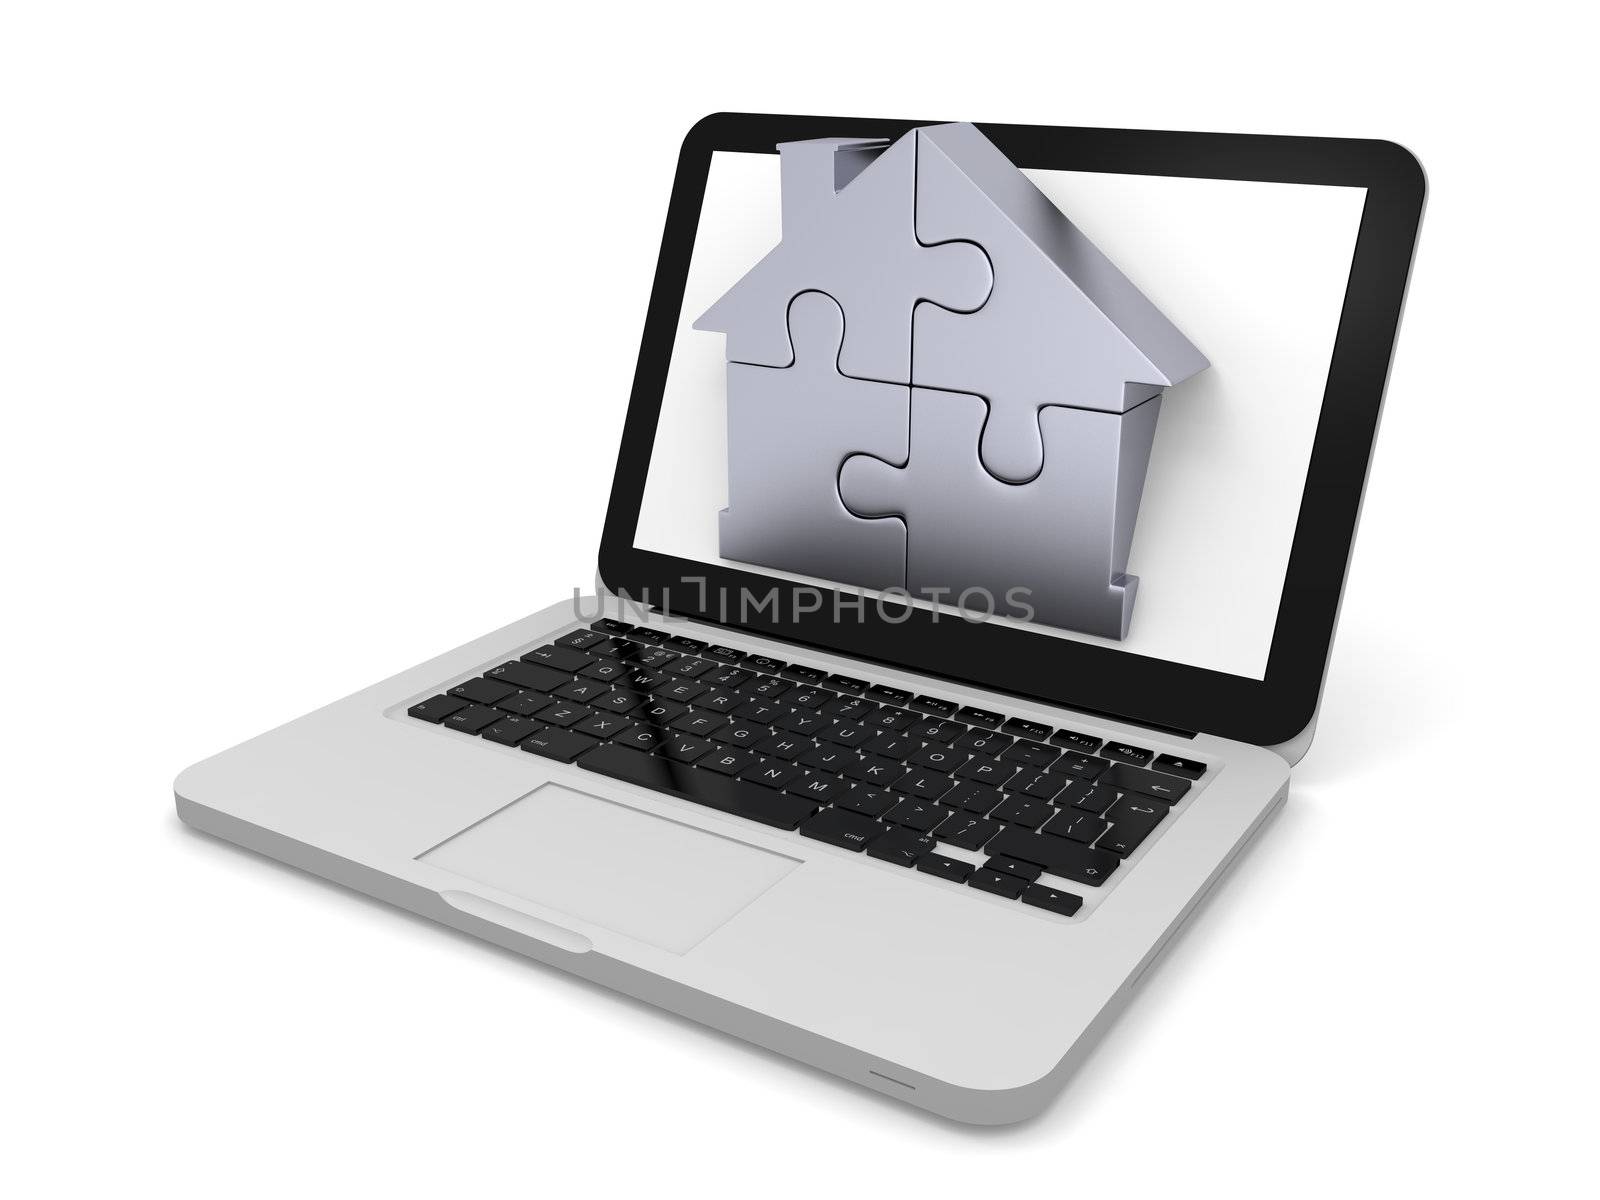 House symbol made of four silver puzzle pieces sticking out of laptop screen